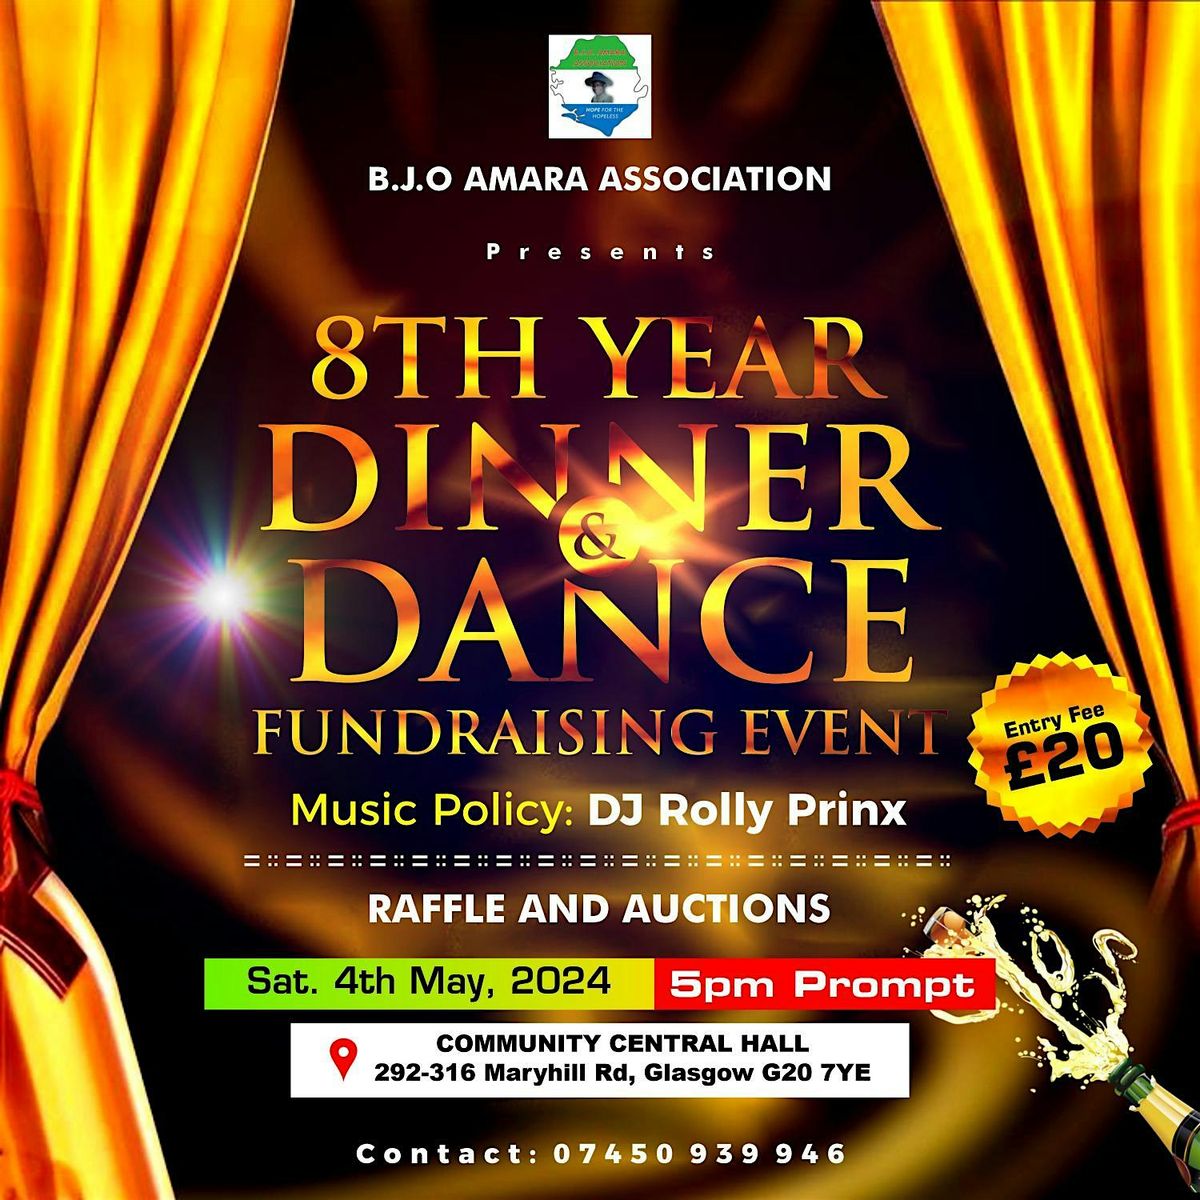 8th year Dinner and Dance fundraising event